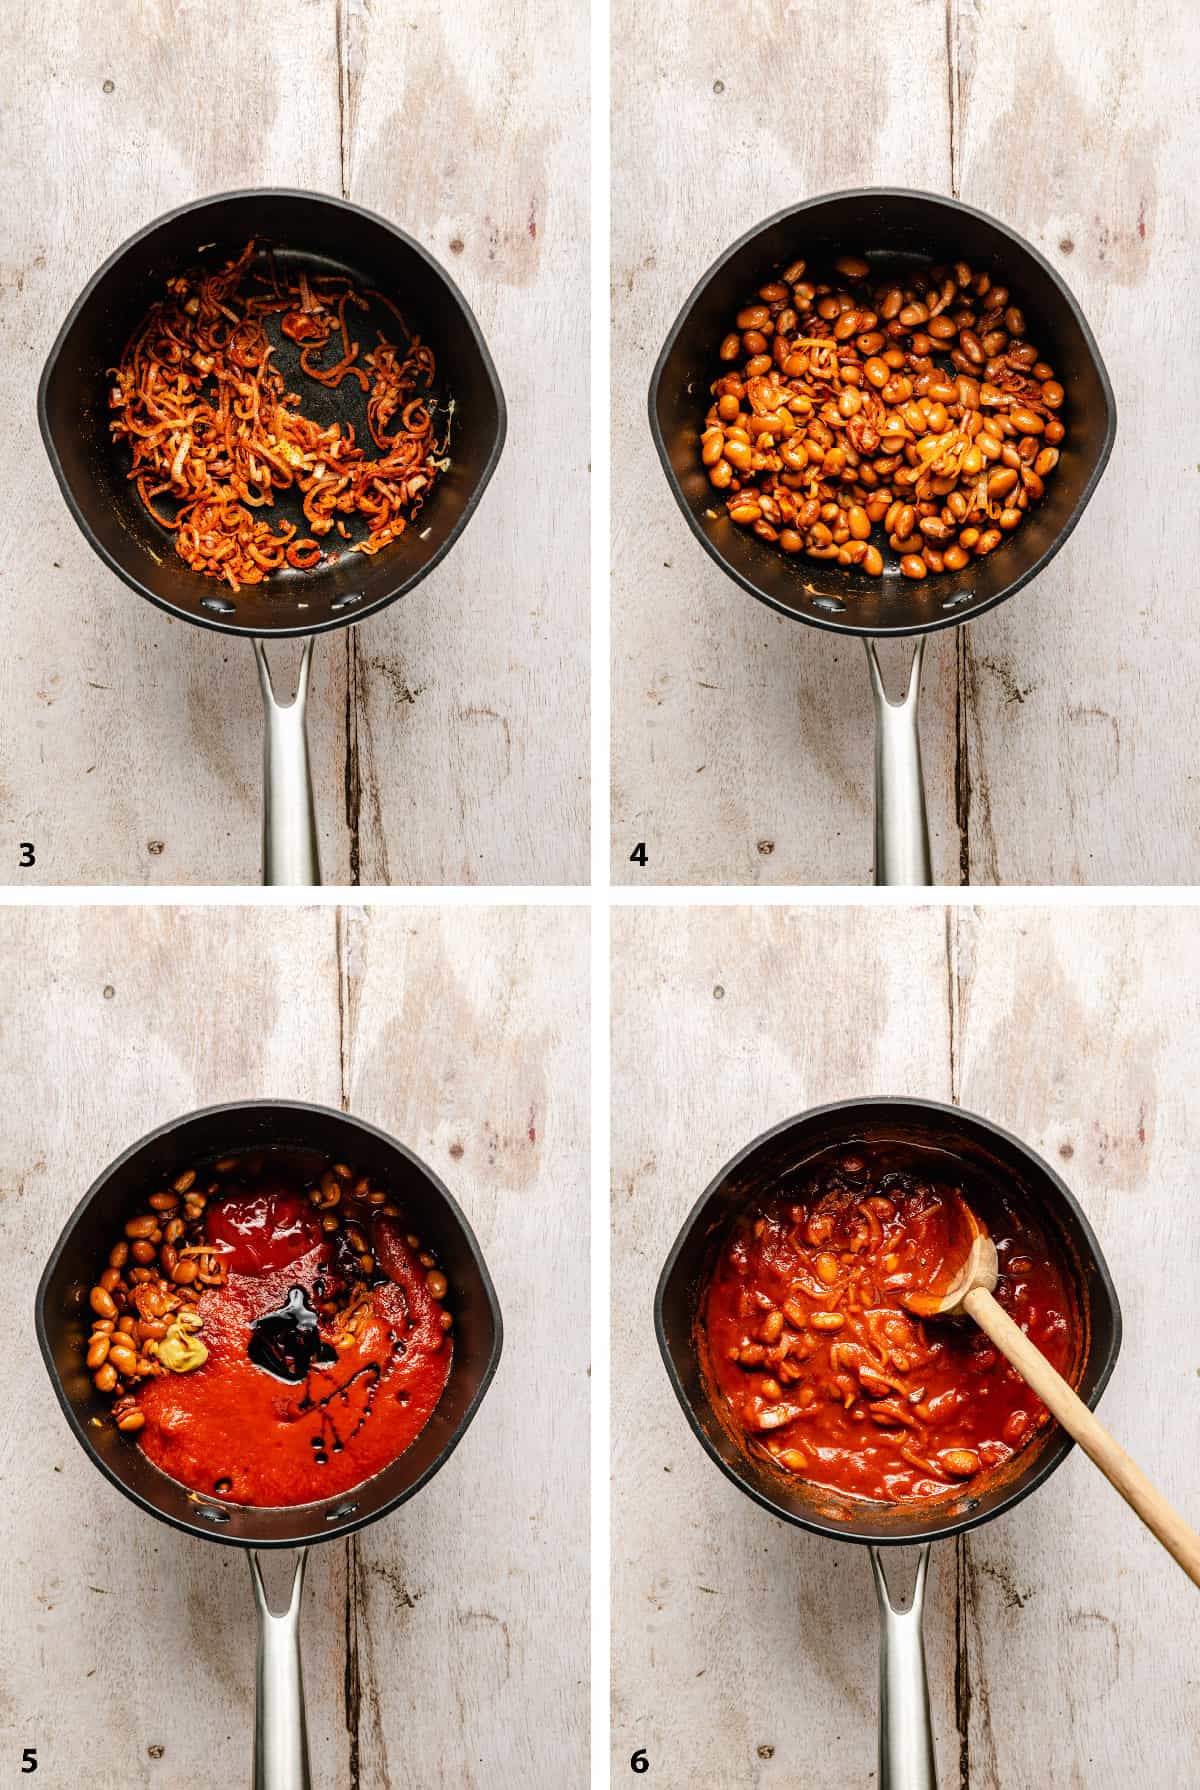 Process of creating the quick smoky beans in a saucepan with a spoon.